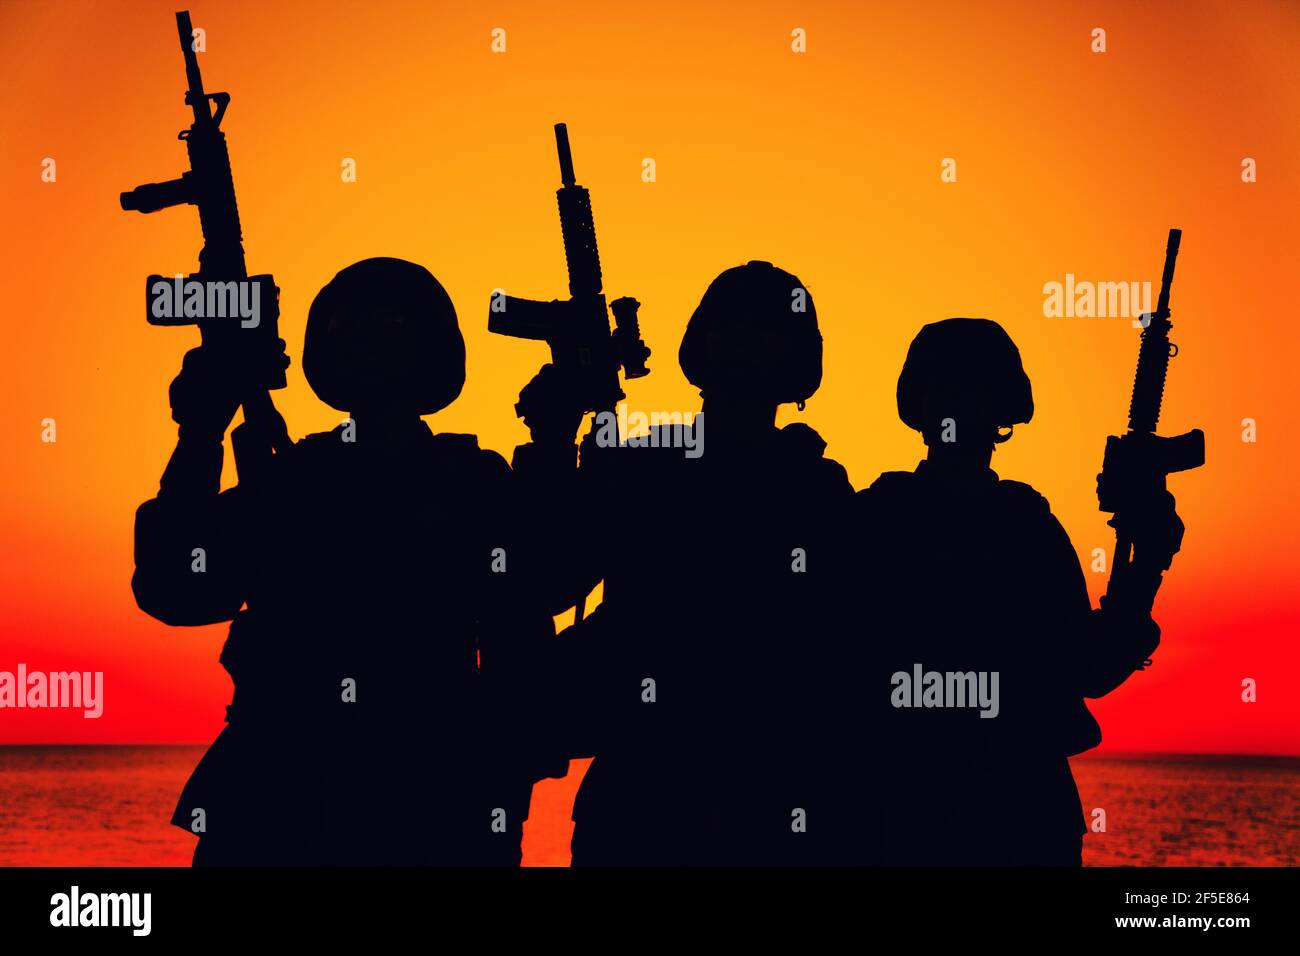 Silhouette of army special operations forces soldiers team, group of Marines or coast guard fighters crew in ammunition and combat helmets standing on seashore at sunset with raised assault rifles Stock Photo